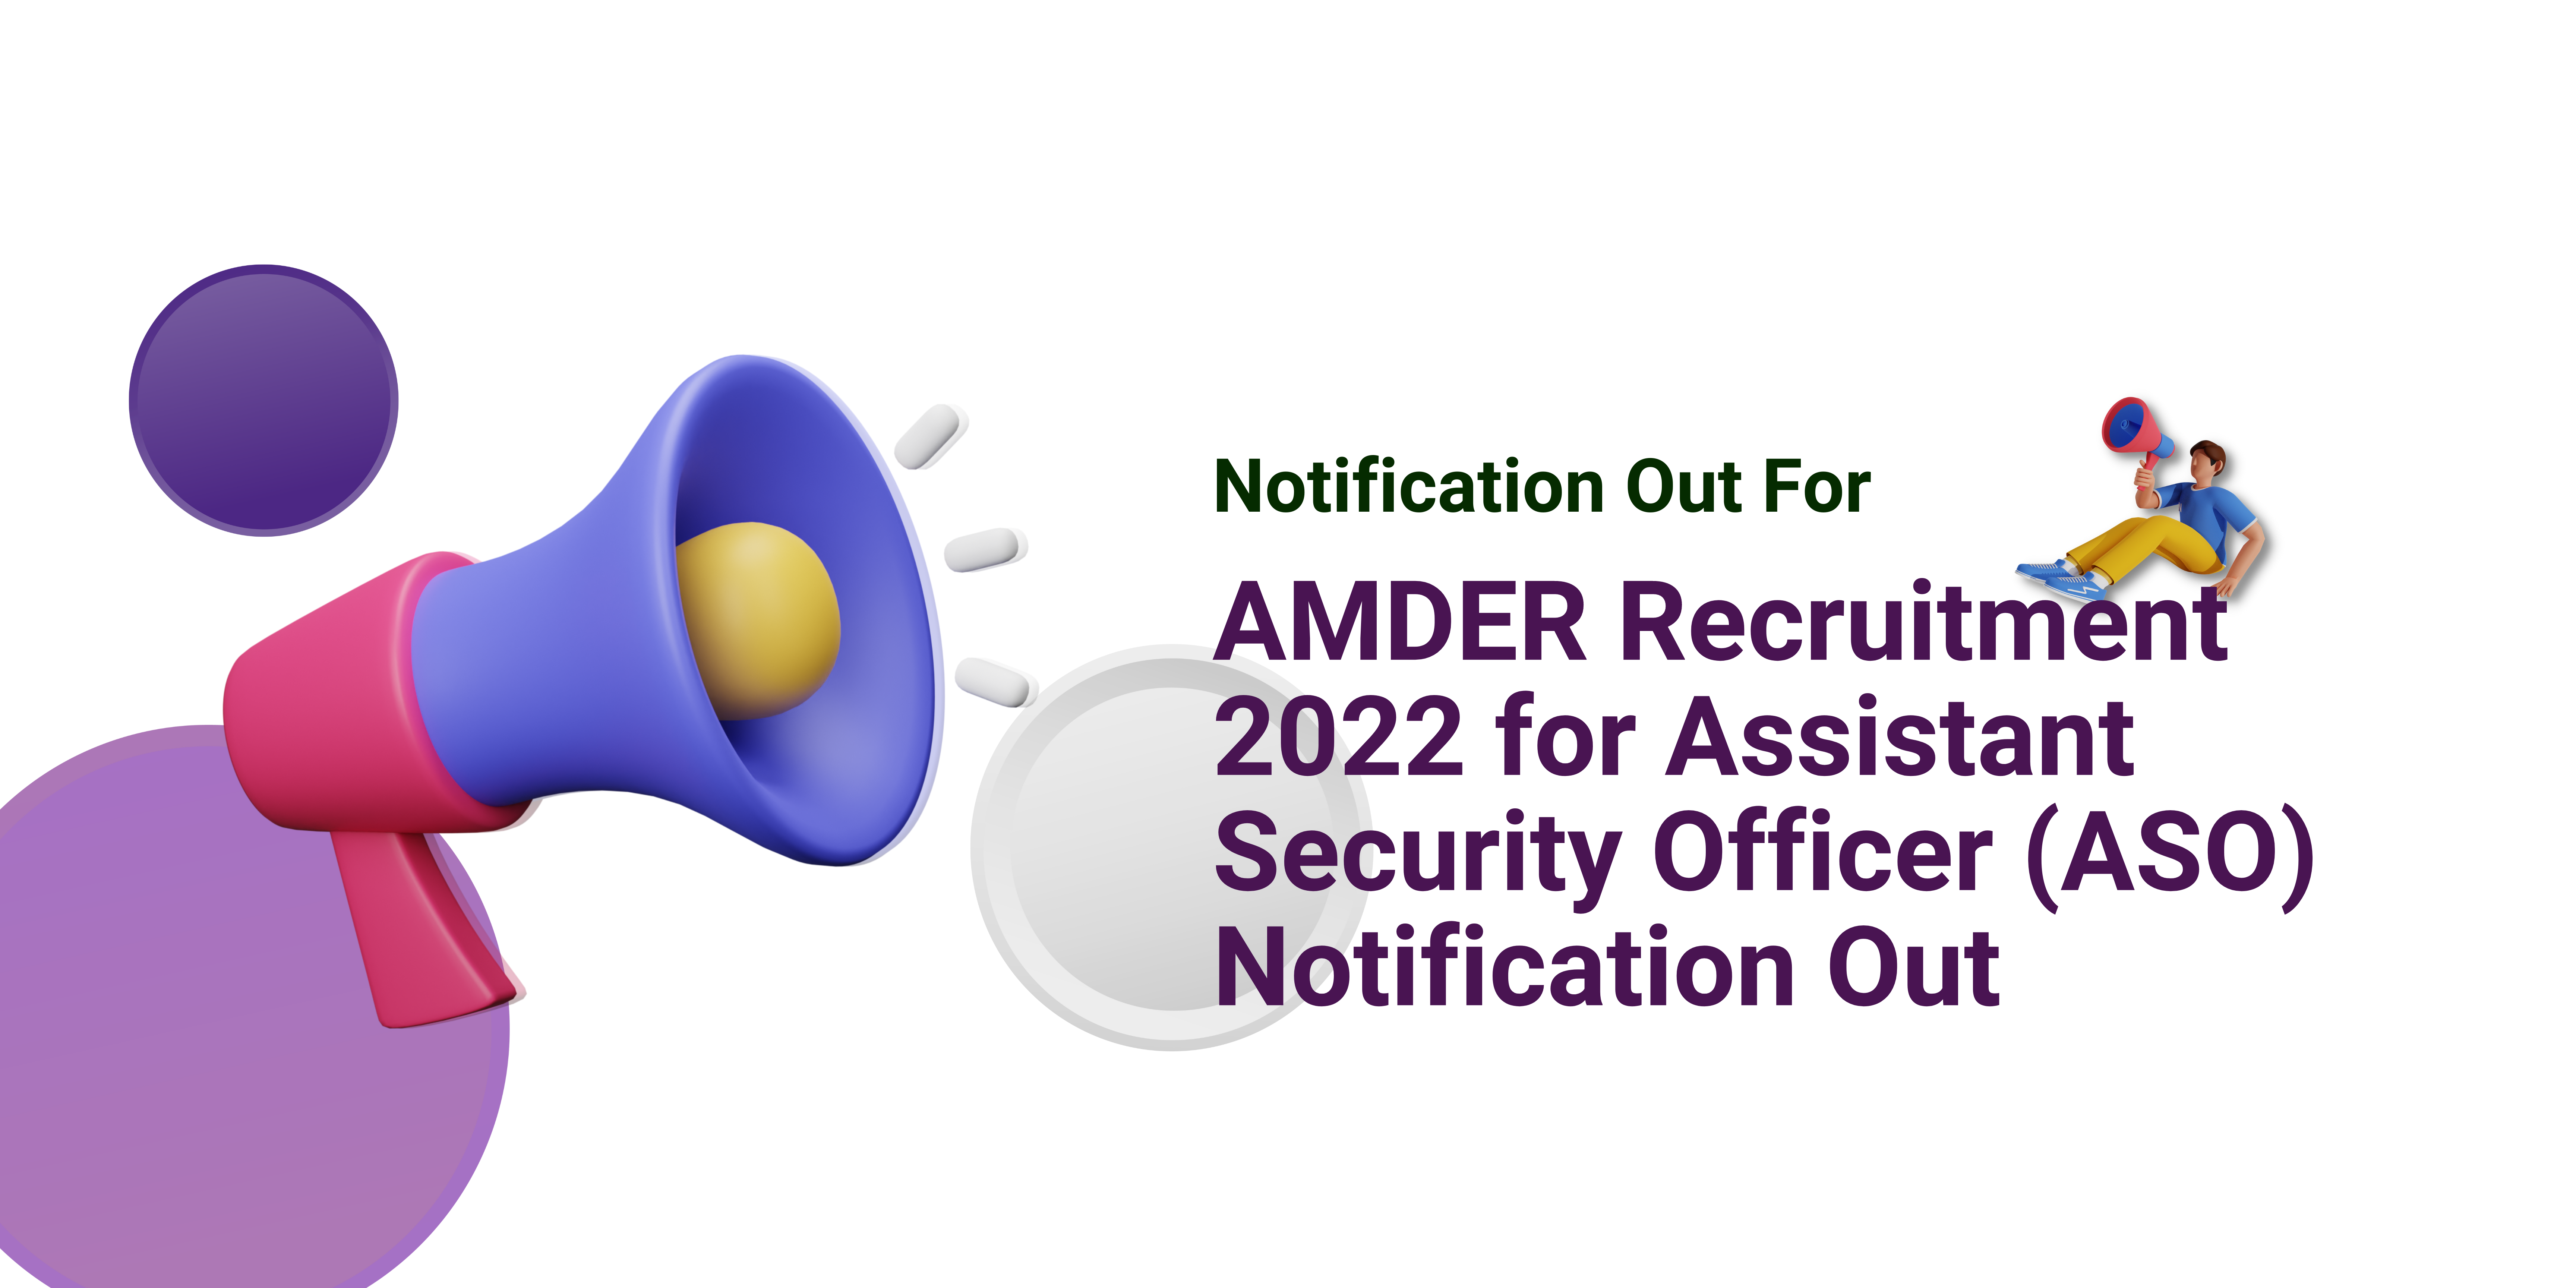 AMDER Recruitment 2022 for Assistant Security Officer (ASO) Notification Out